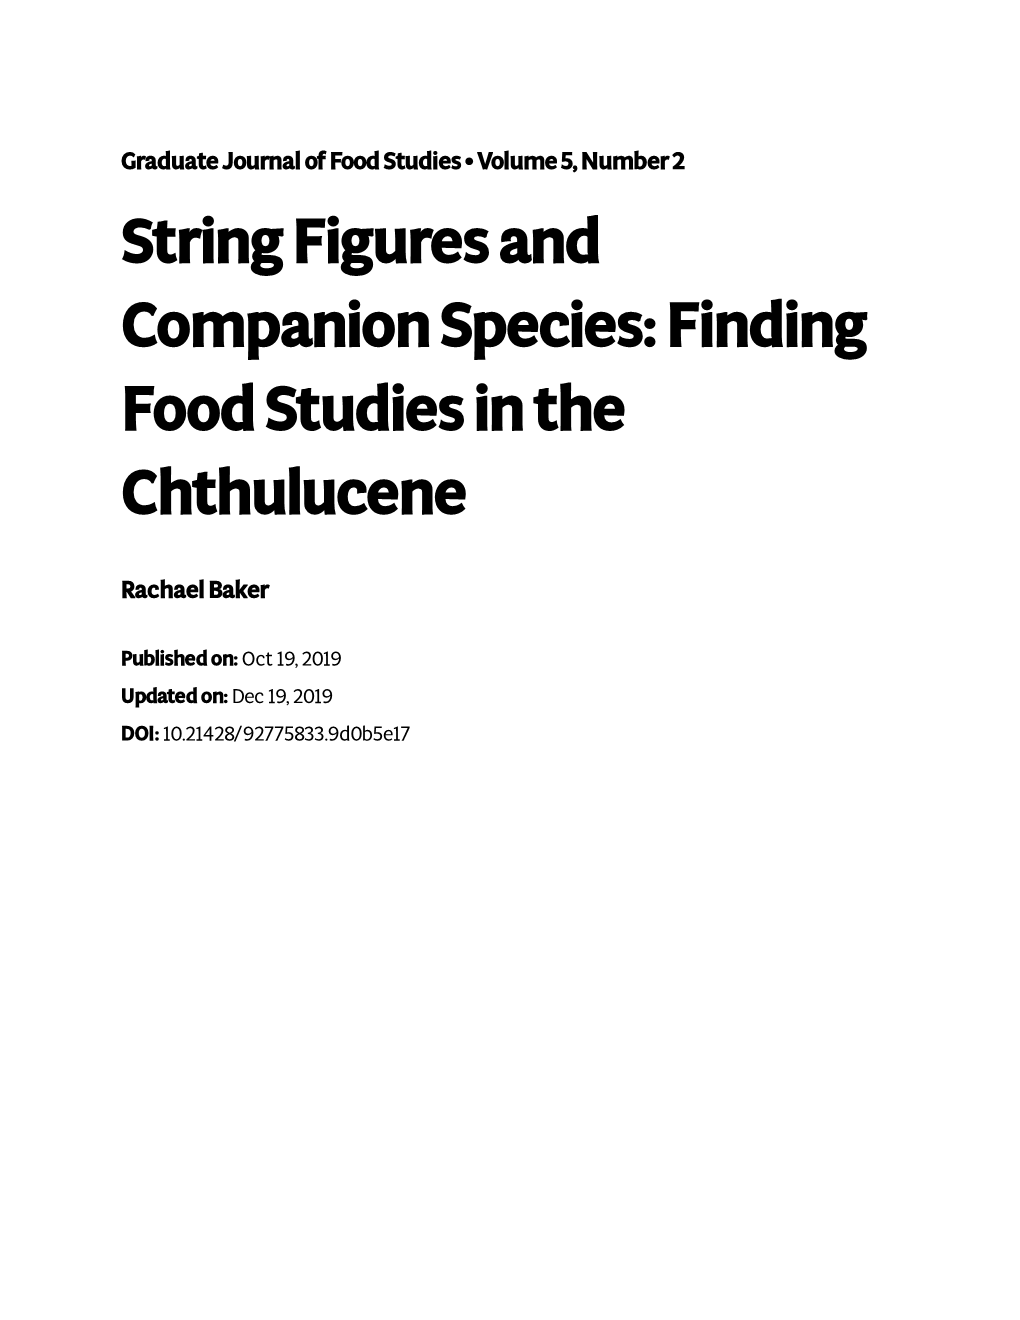 String Figures and Companion Species: Finding Food Studies in the Chthulucene